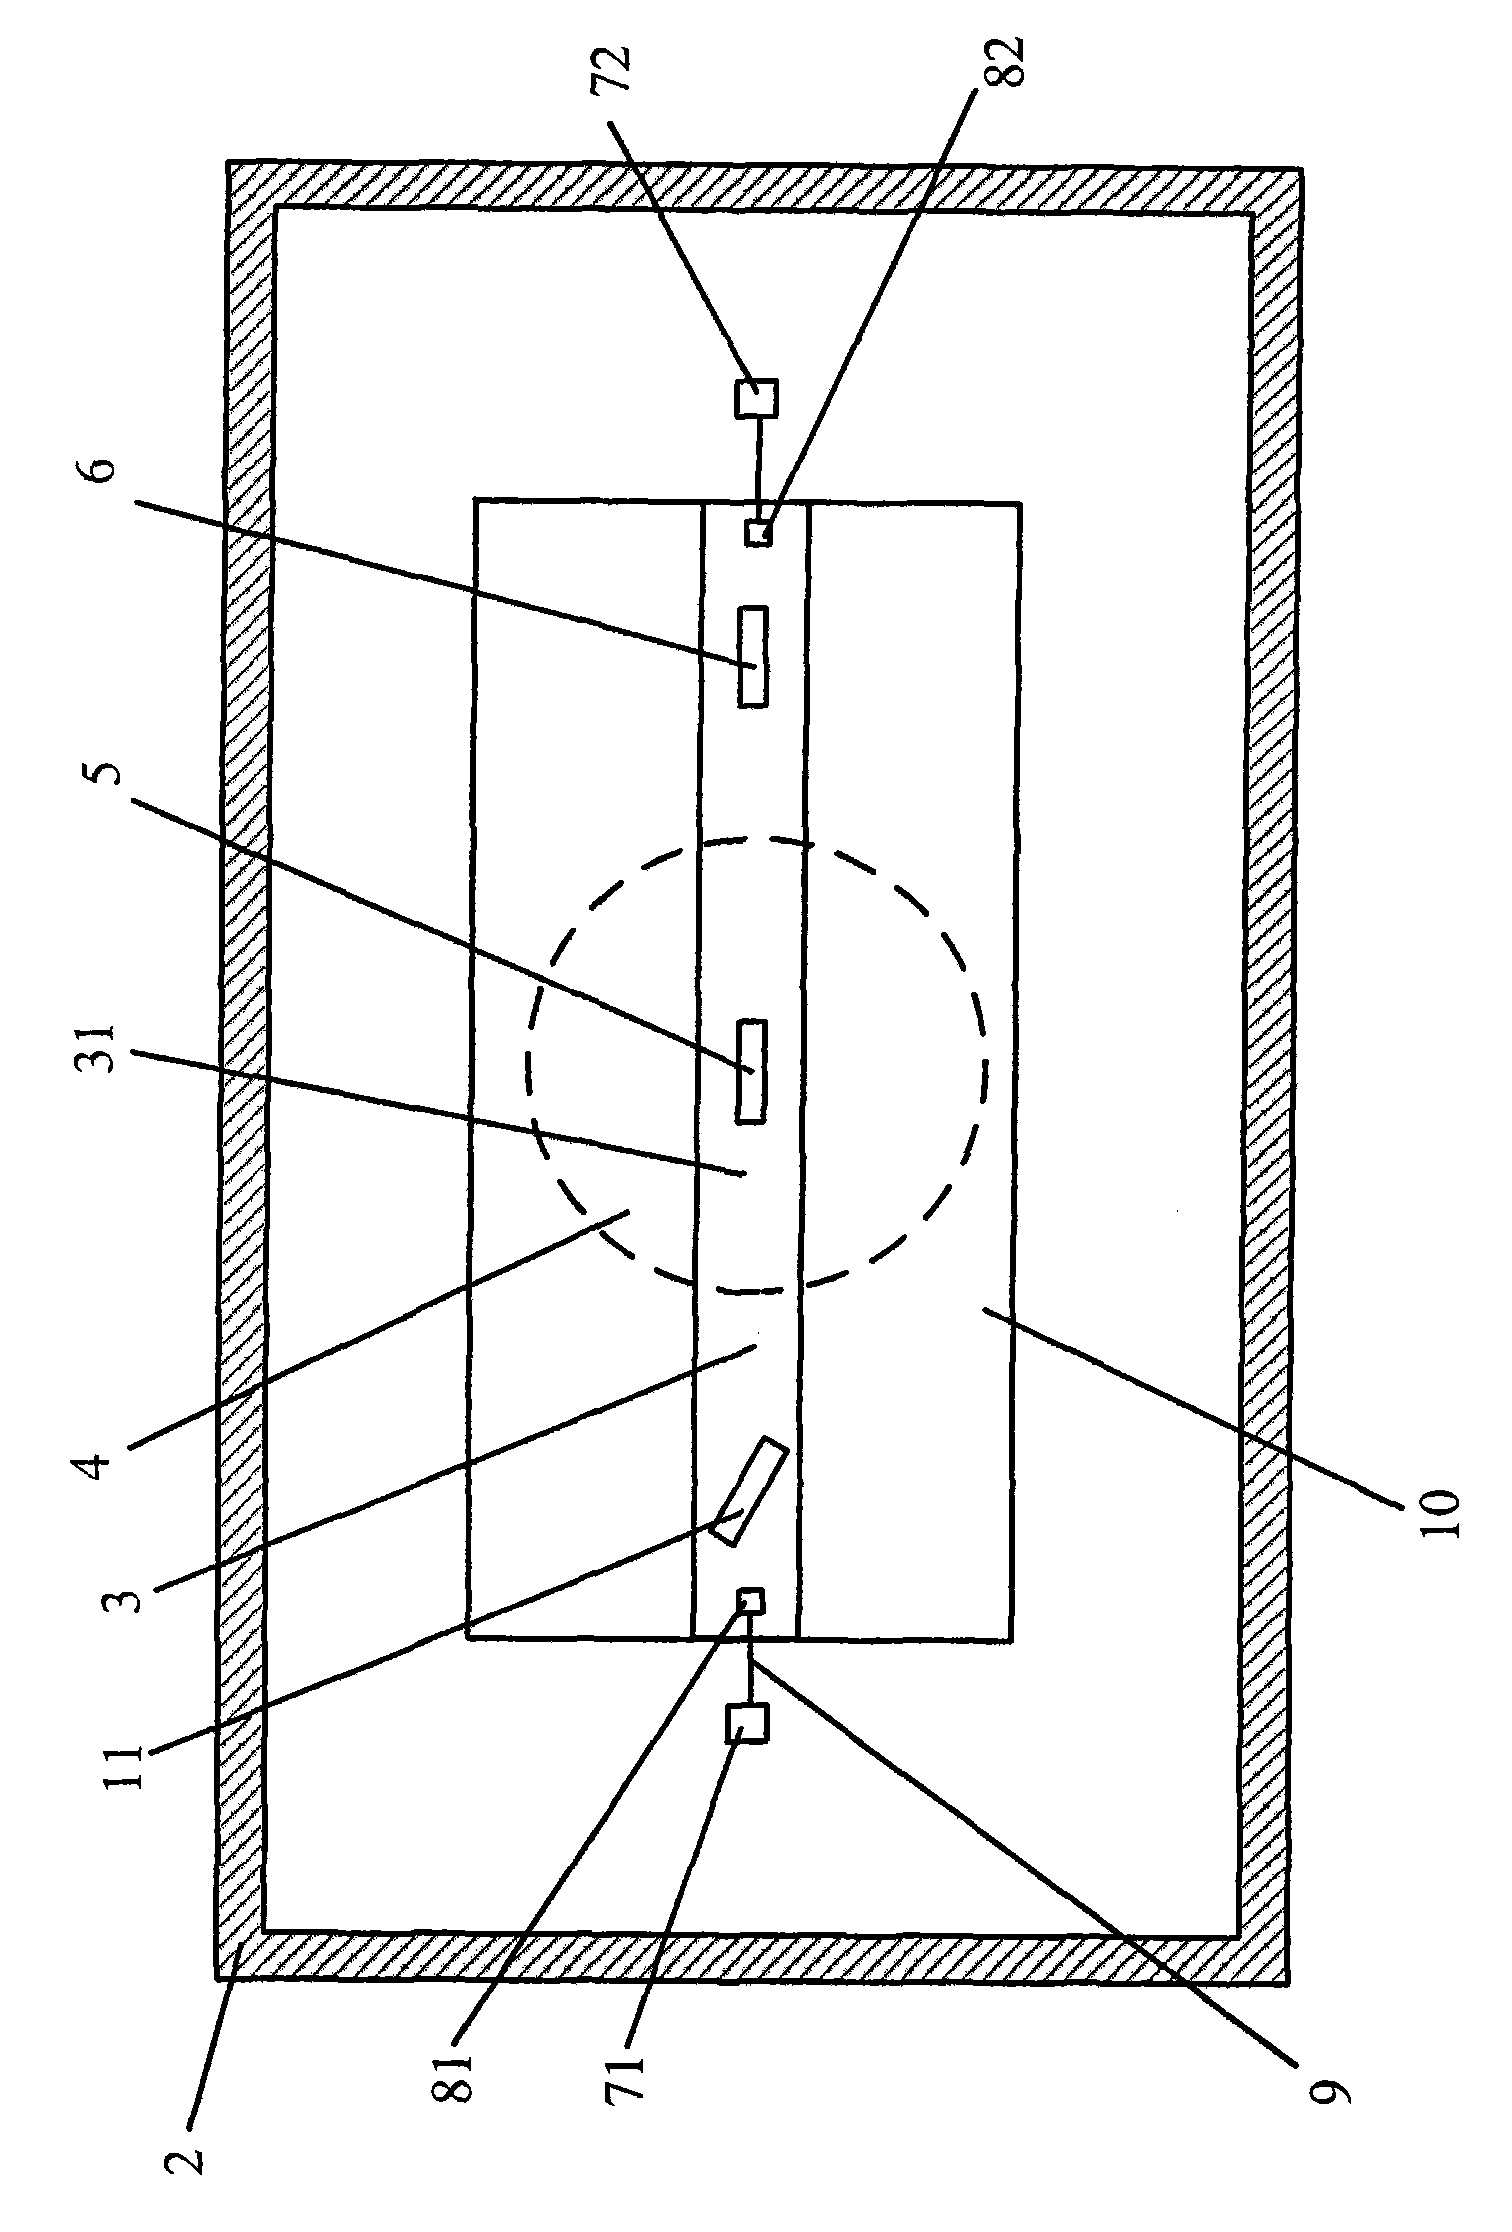 Acoustic surface wave pressure sensor and acoustic surface wave temperature sensor